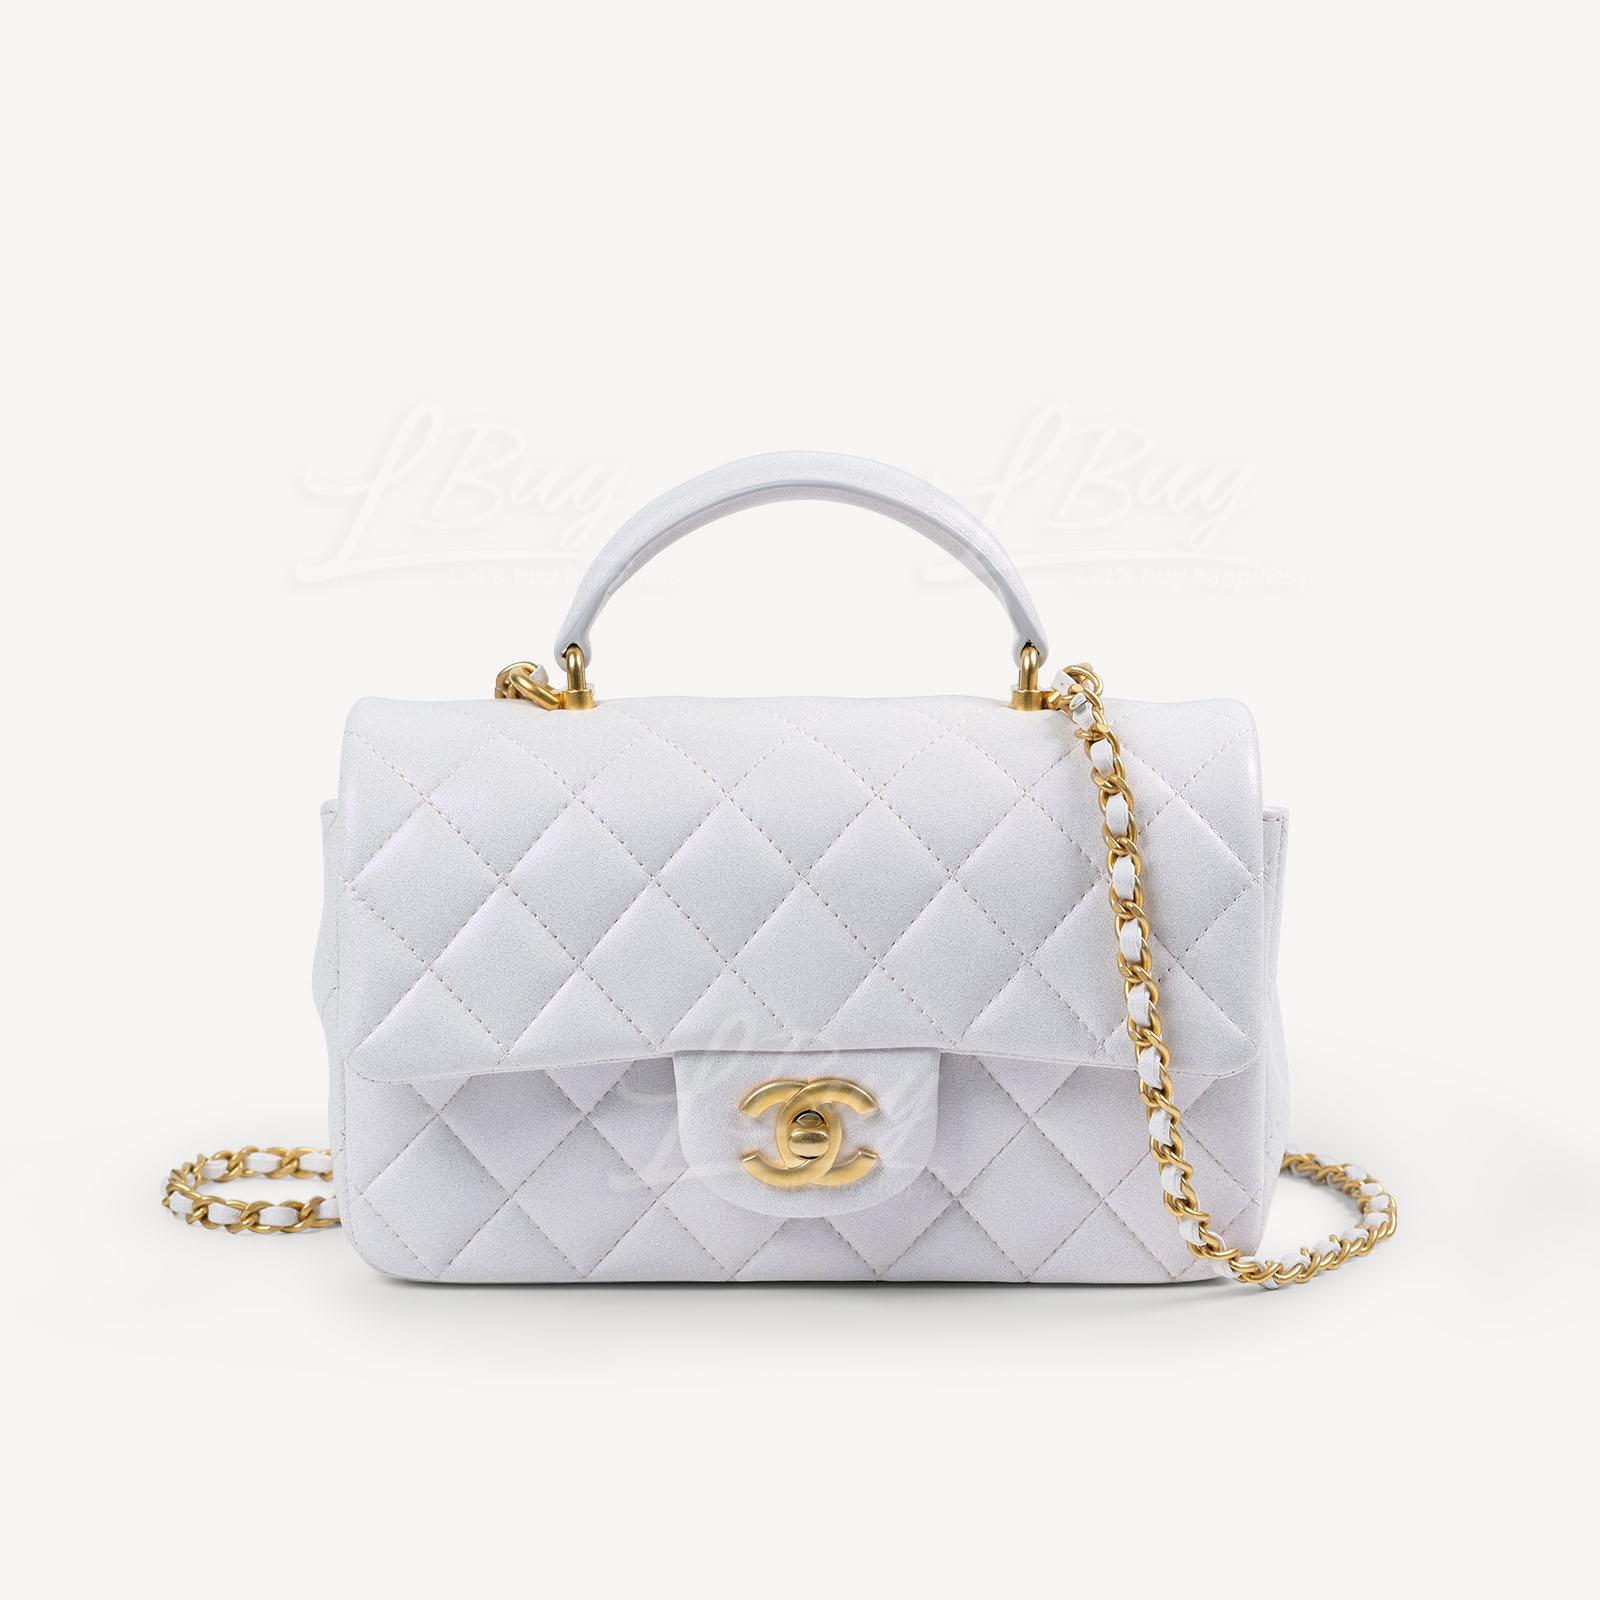 CHANEL-Chanel White Flap Bag with Top Handle